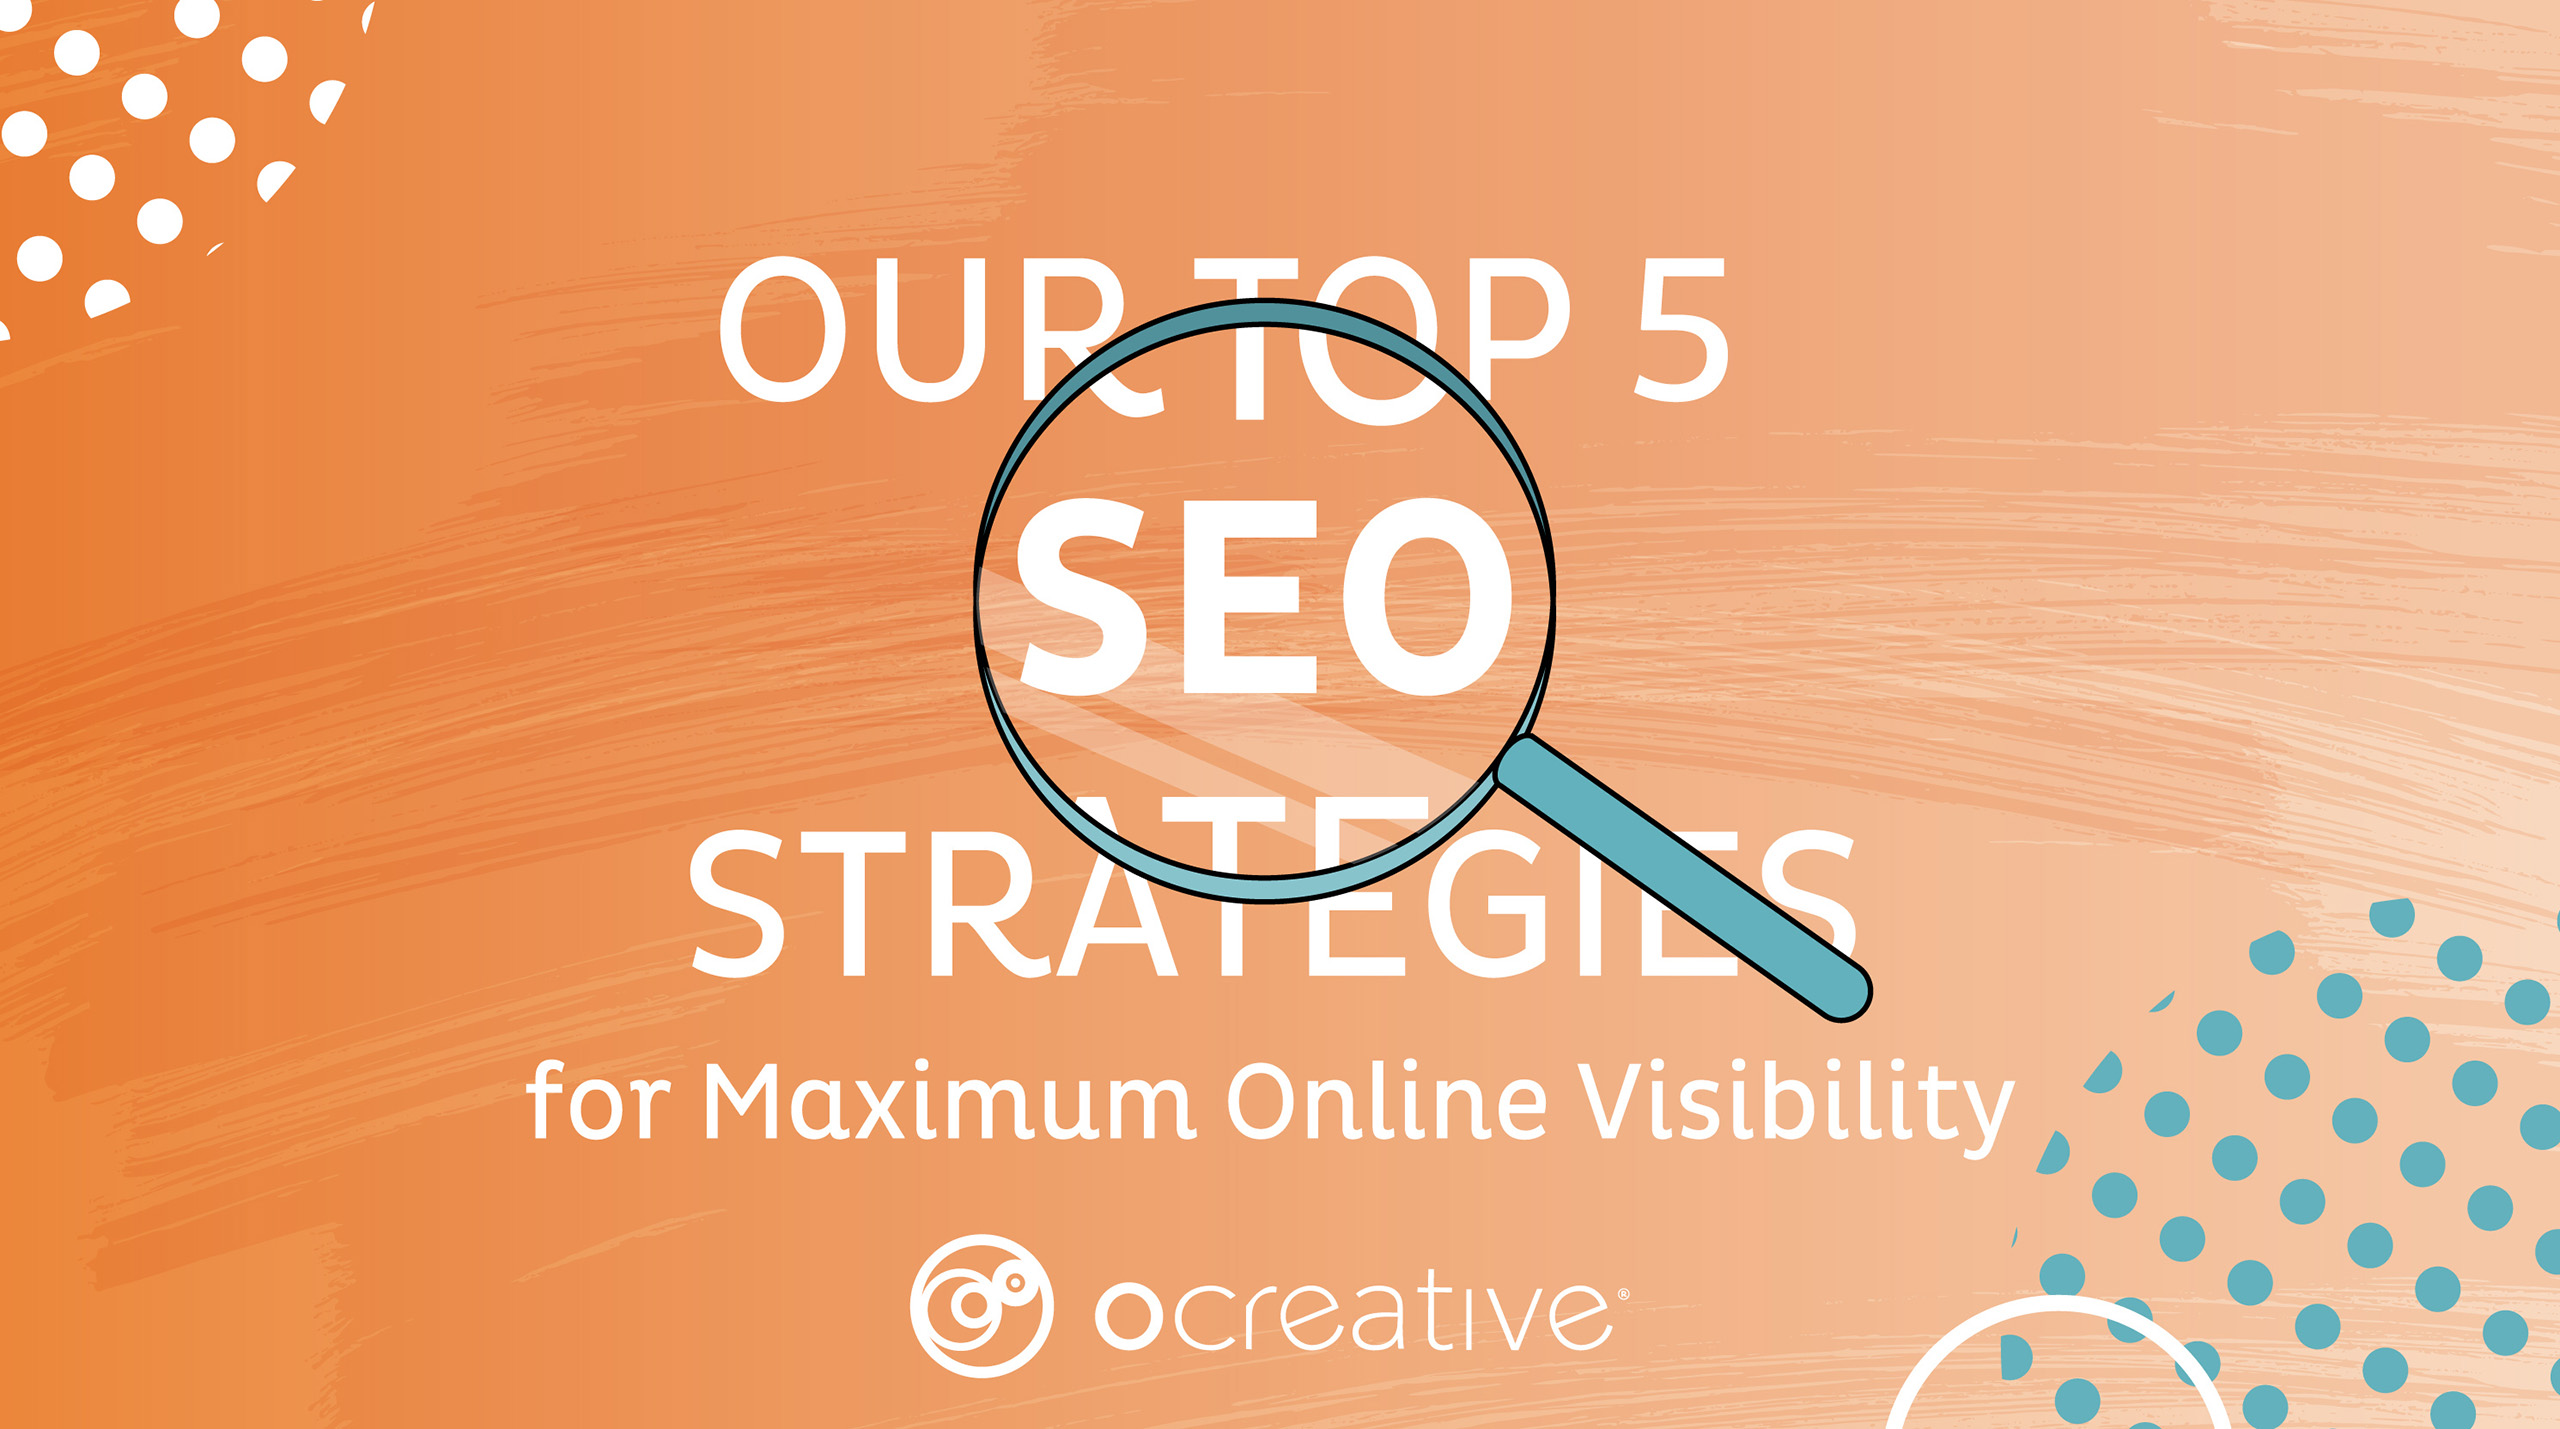 Our Top 5 Seo Strategies